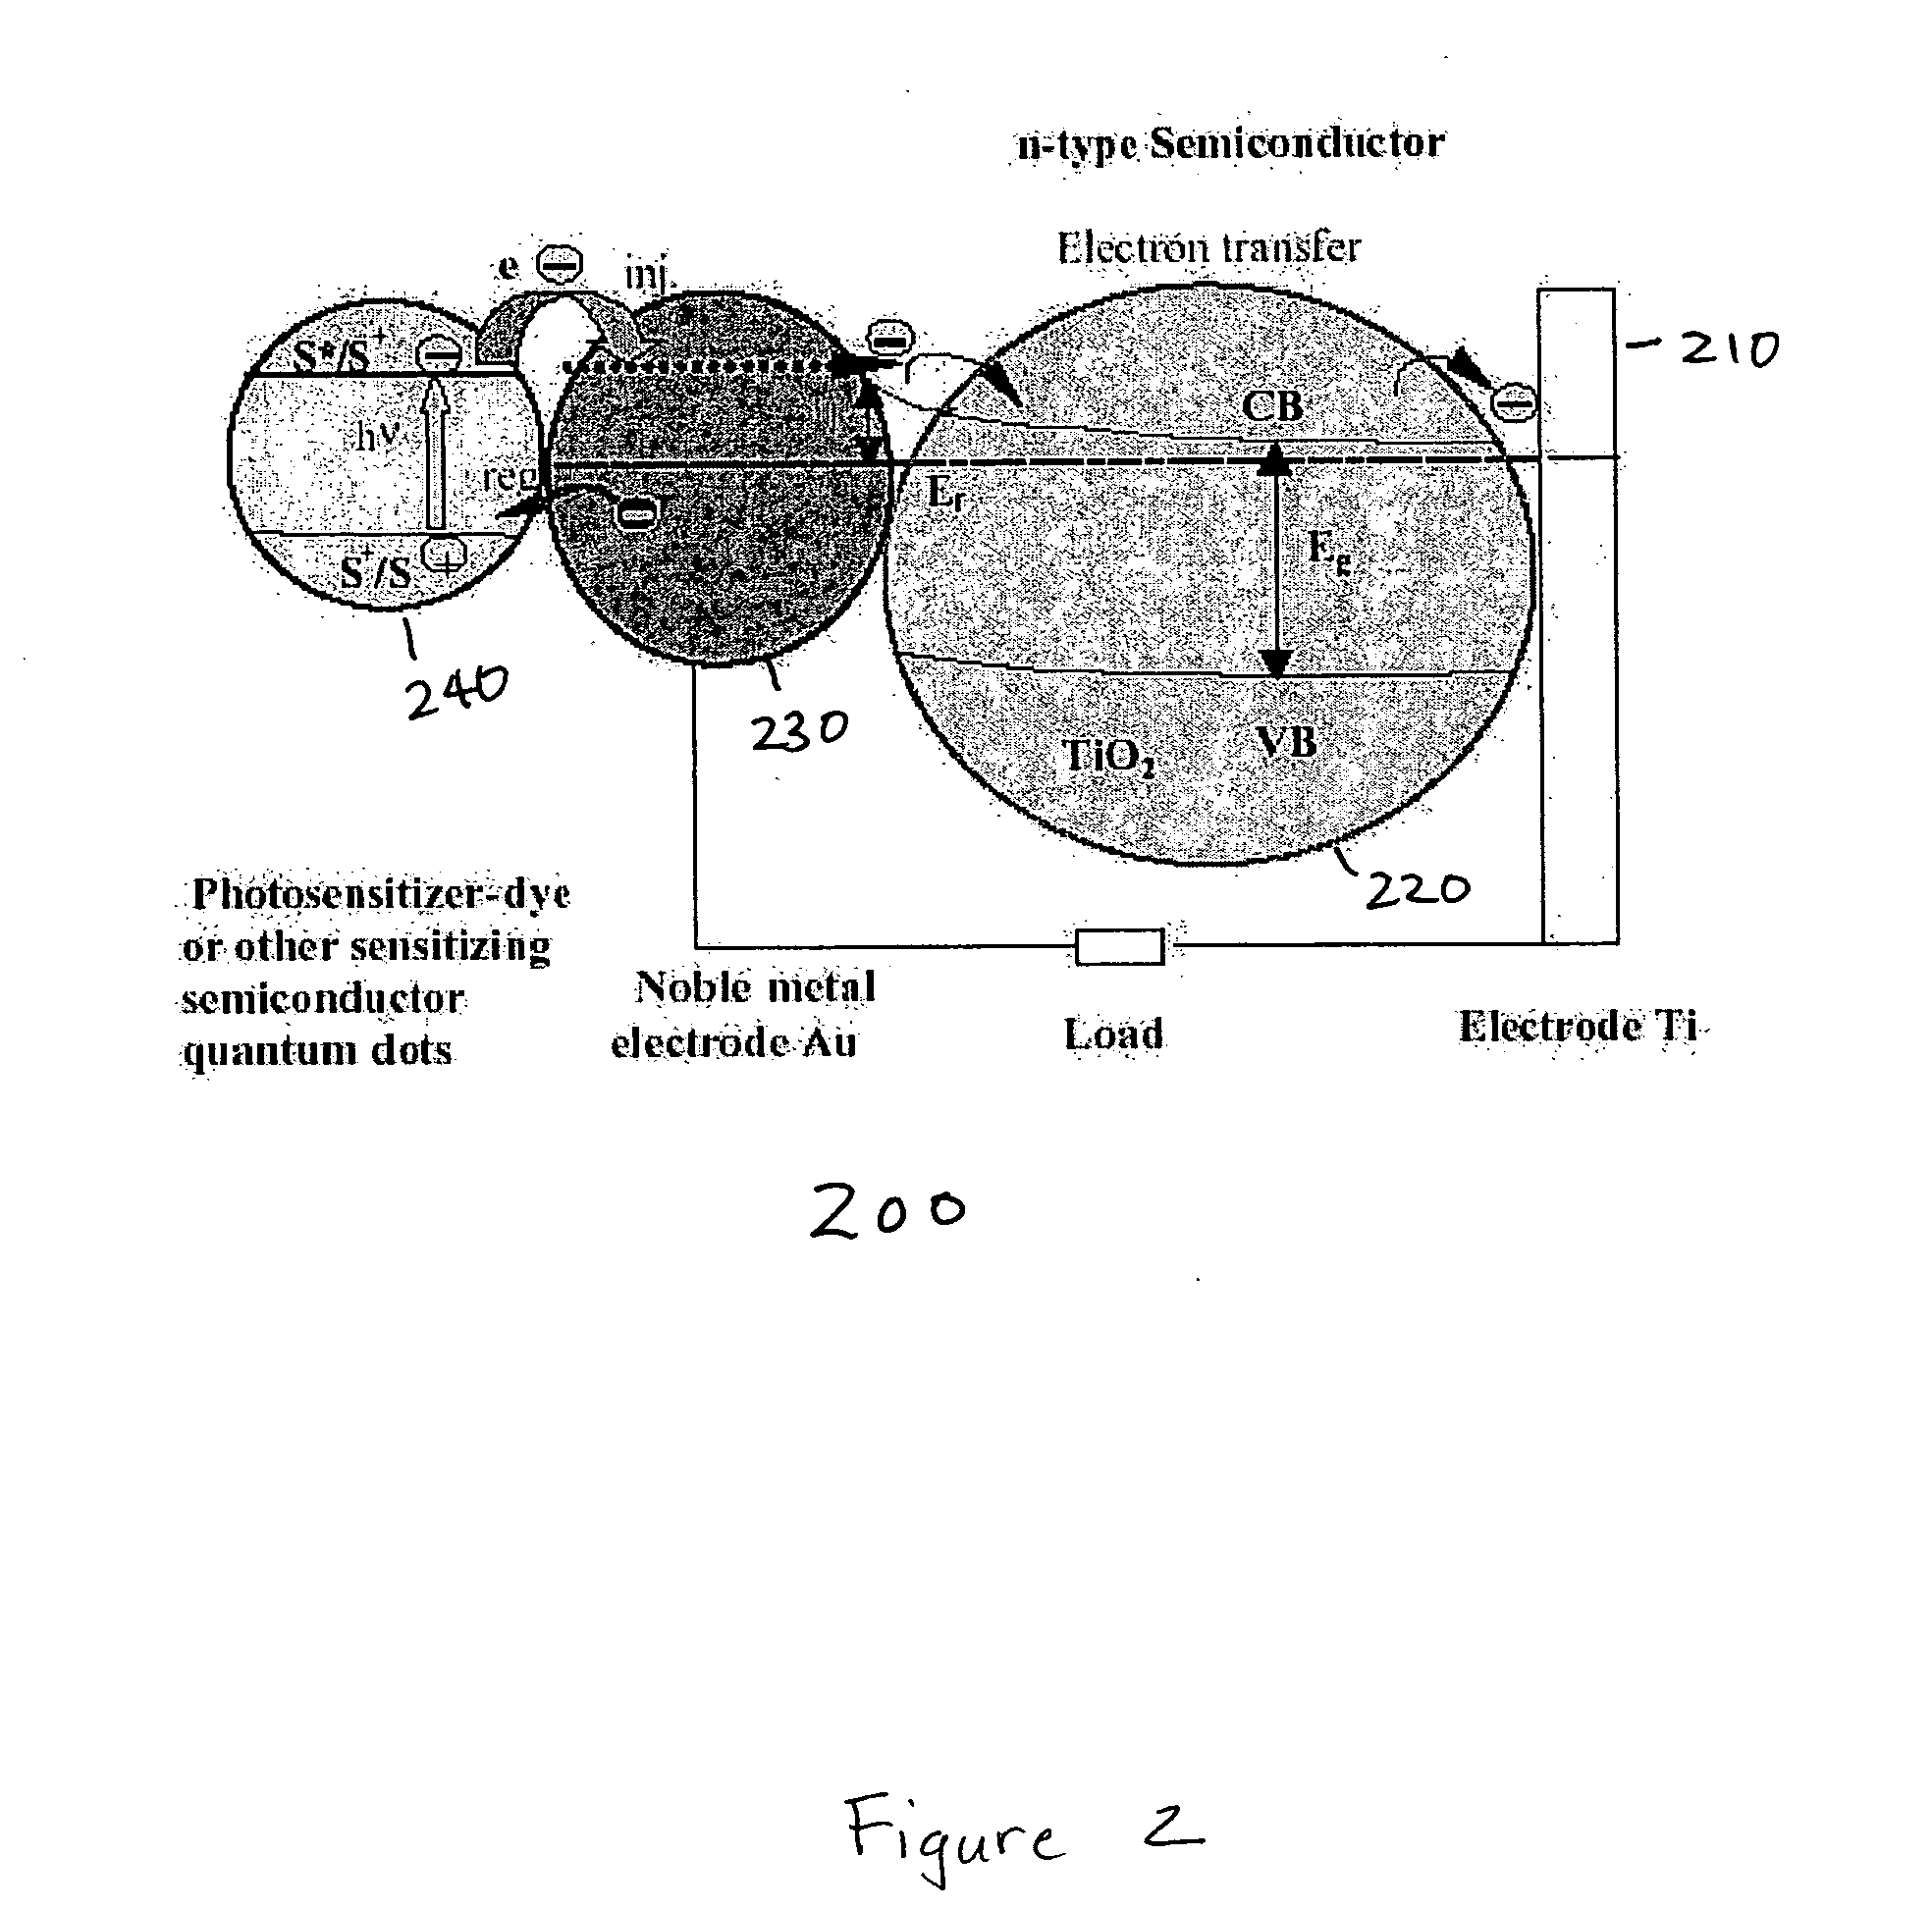 Self-assembly methods for the fabrication of McFarland-Tang photovoltaic devices